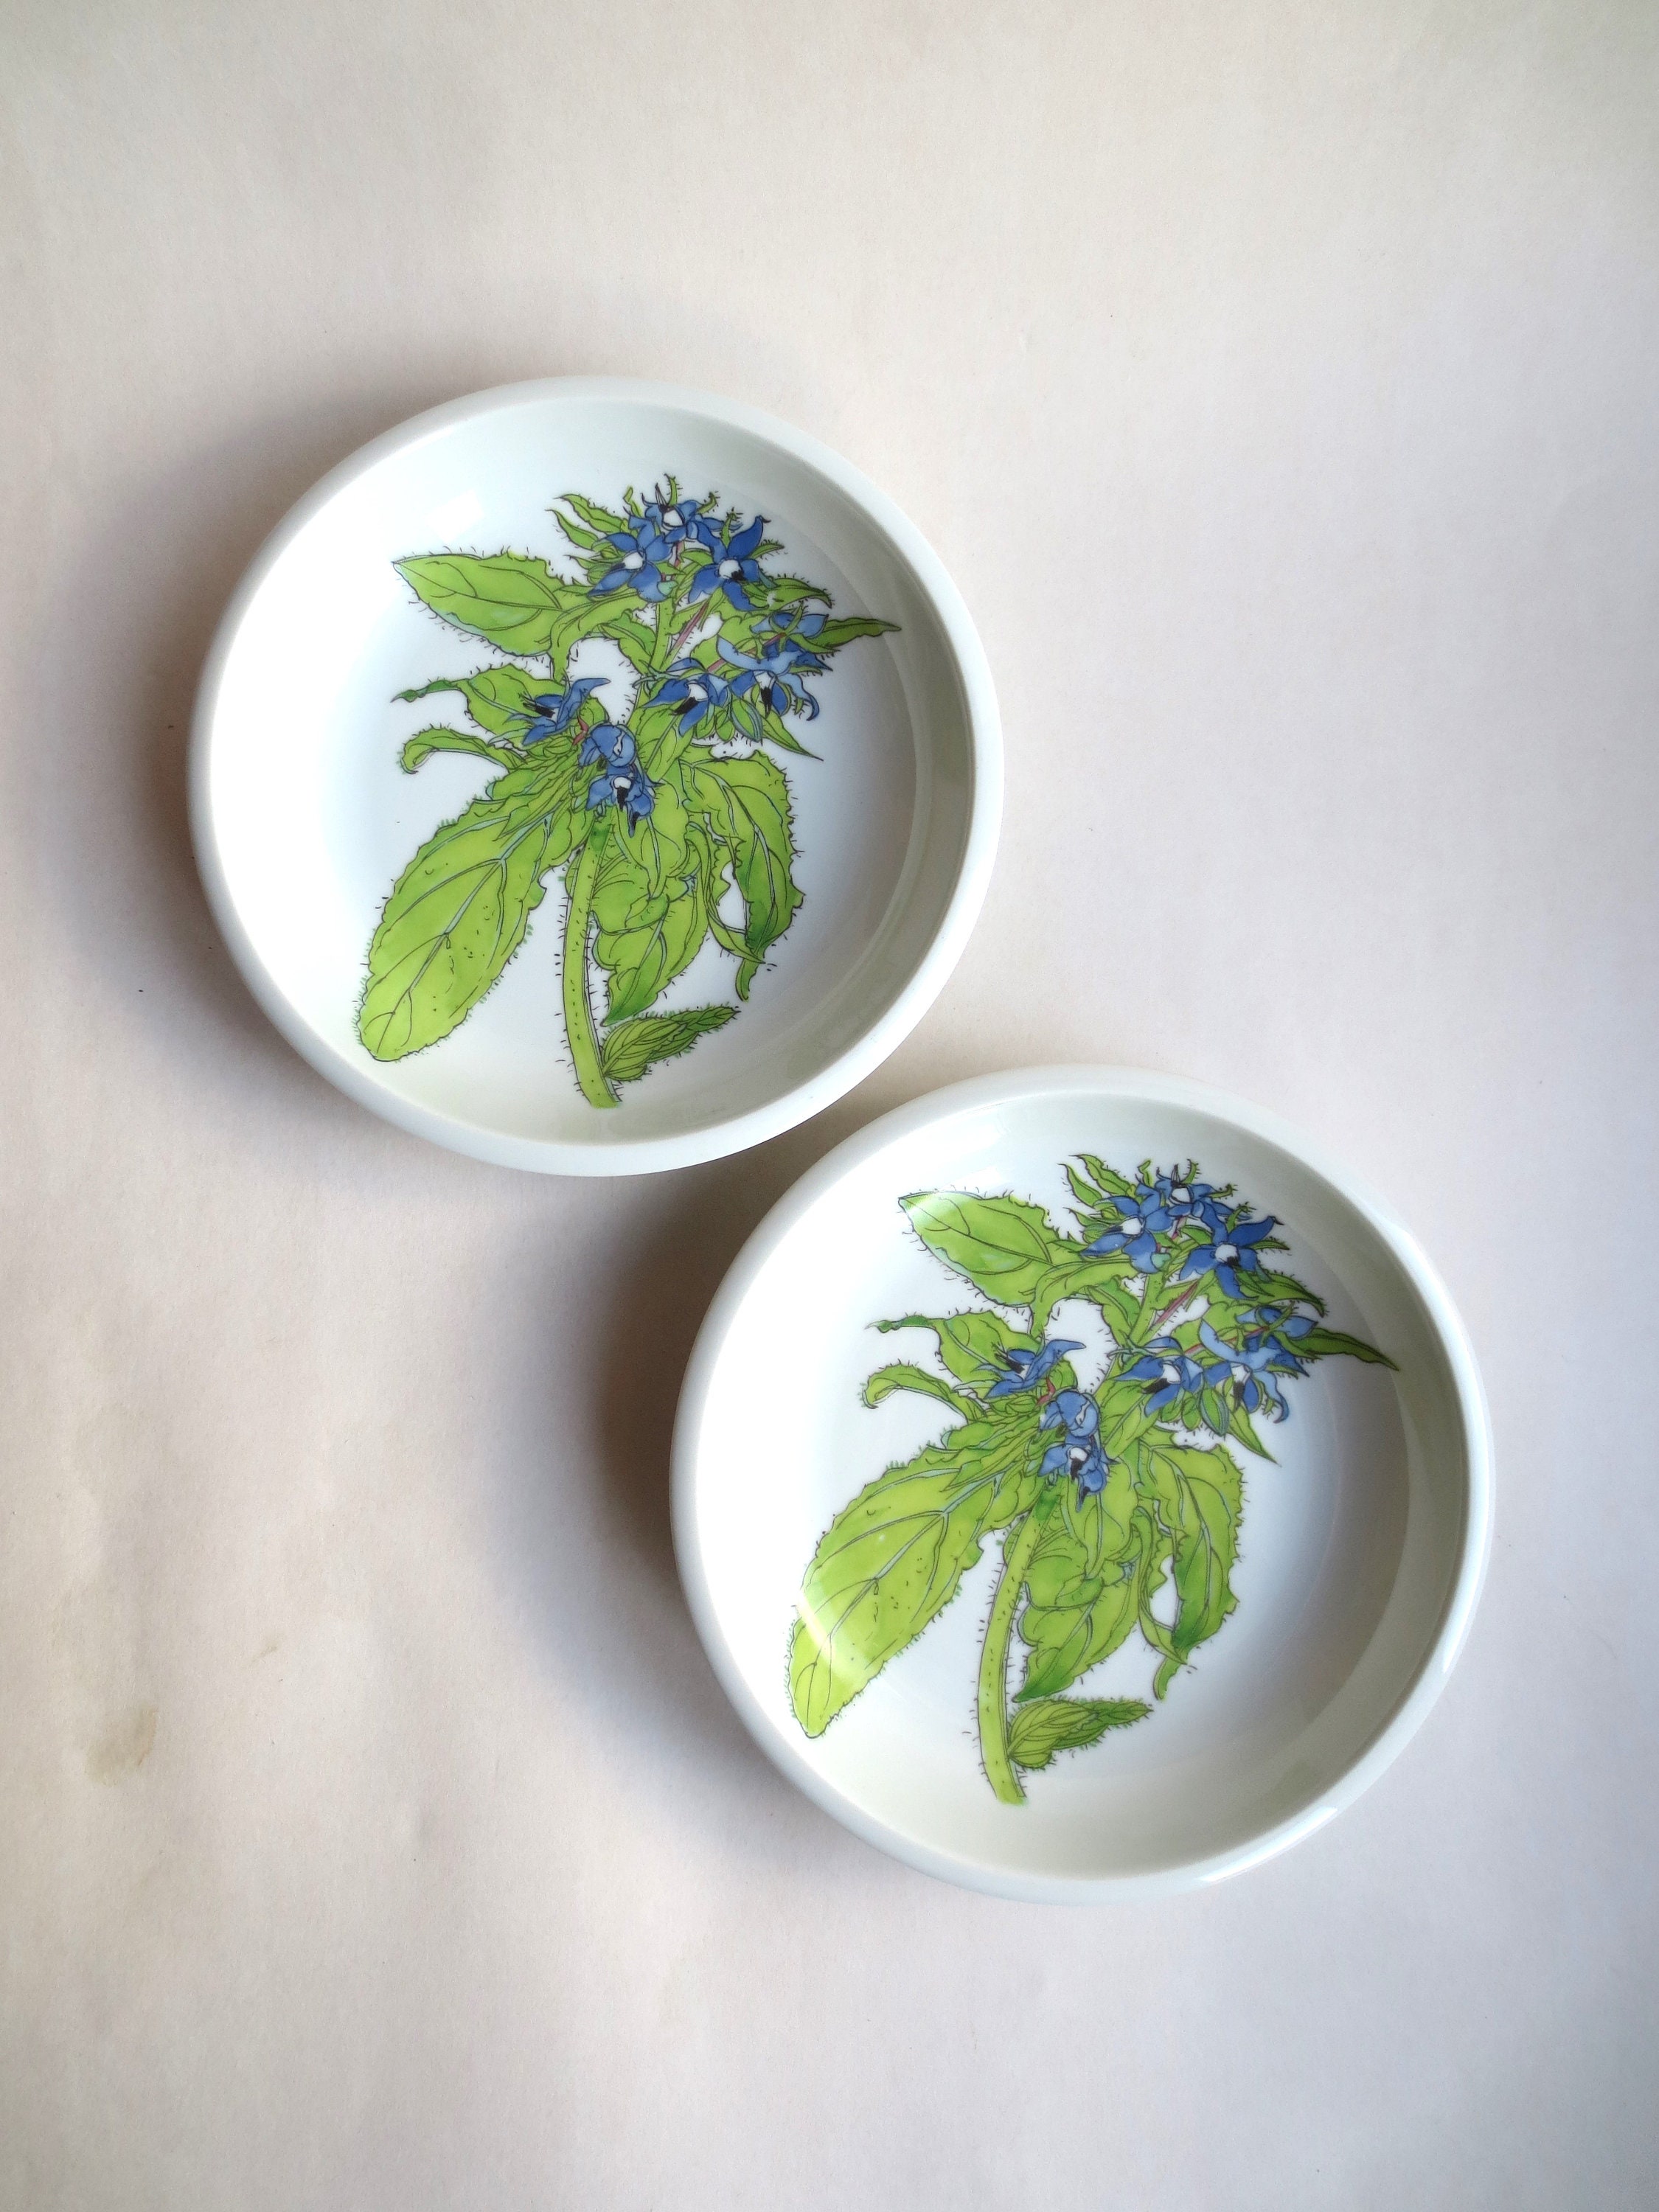 IKEA Plates. Two Deep Daisy Plates by Marguerite Walfridsson